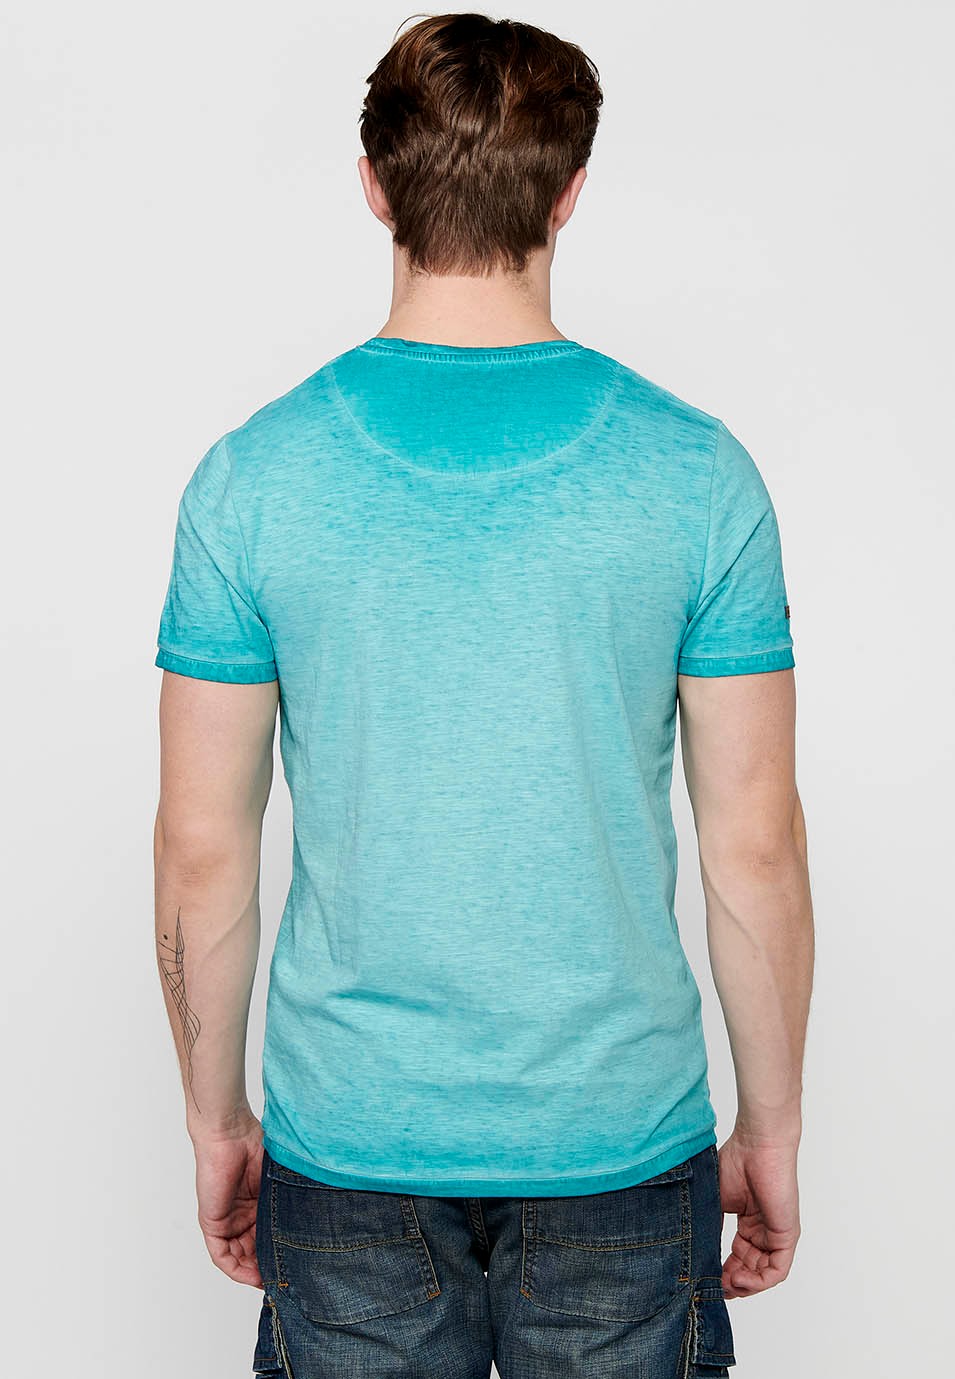 Men's Short Sleeve Cotton T-shirt with Round Neck and Mint Color Front Print 1